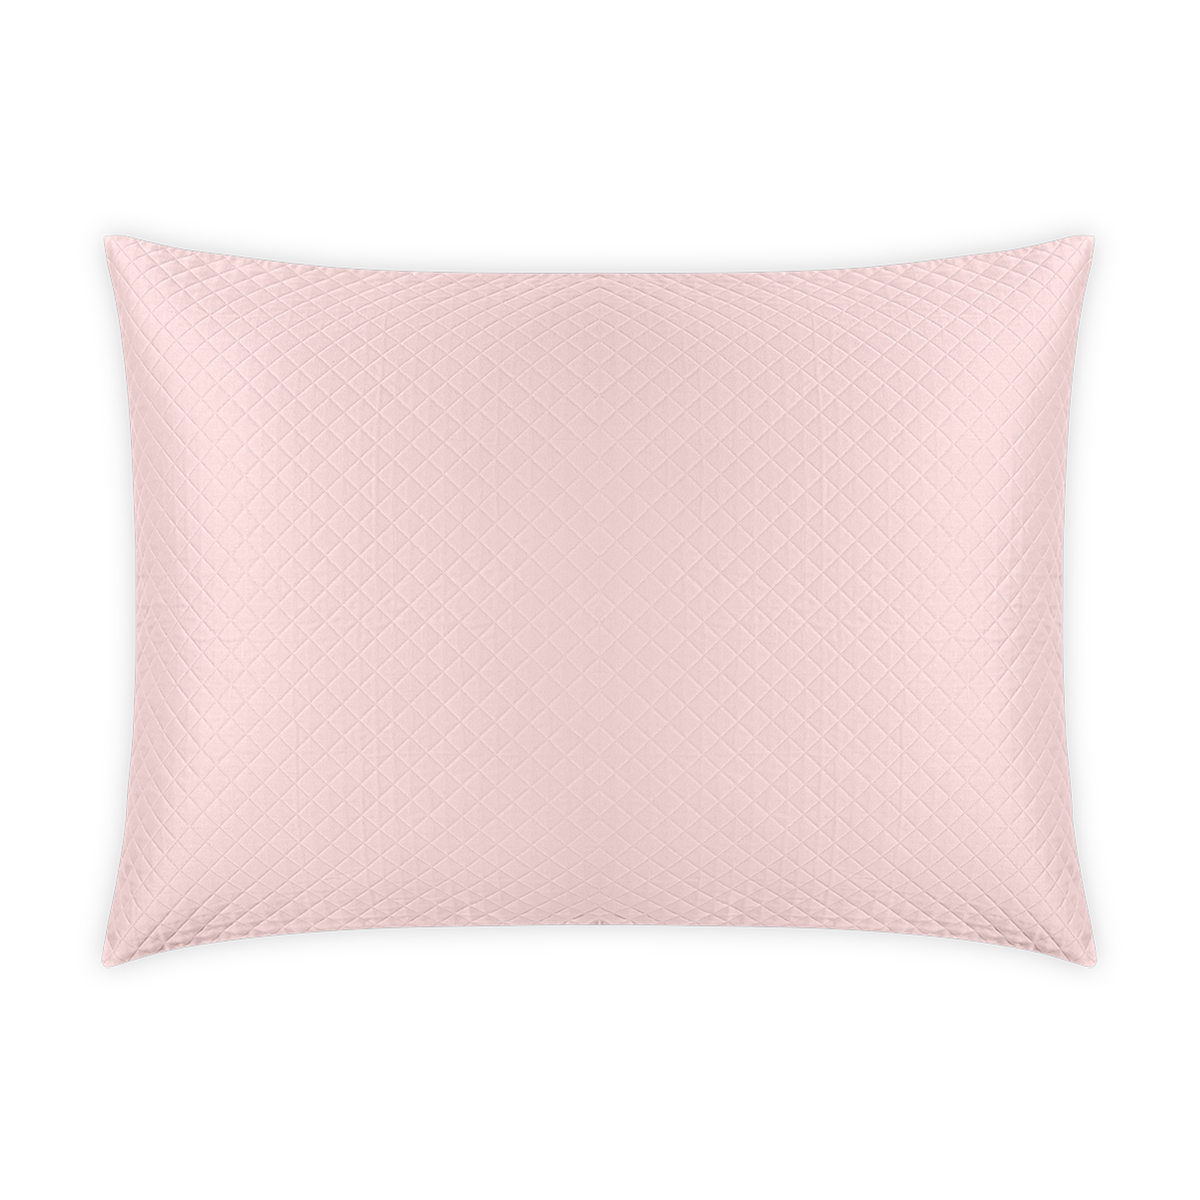 Sham of Matouk Petra Bedding in Color Pink